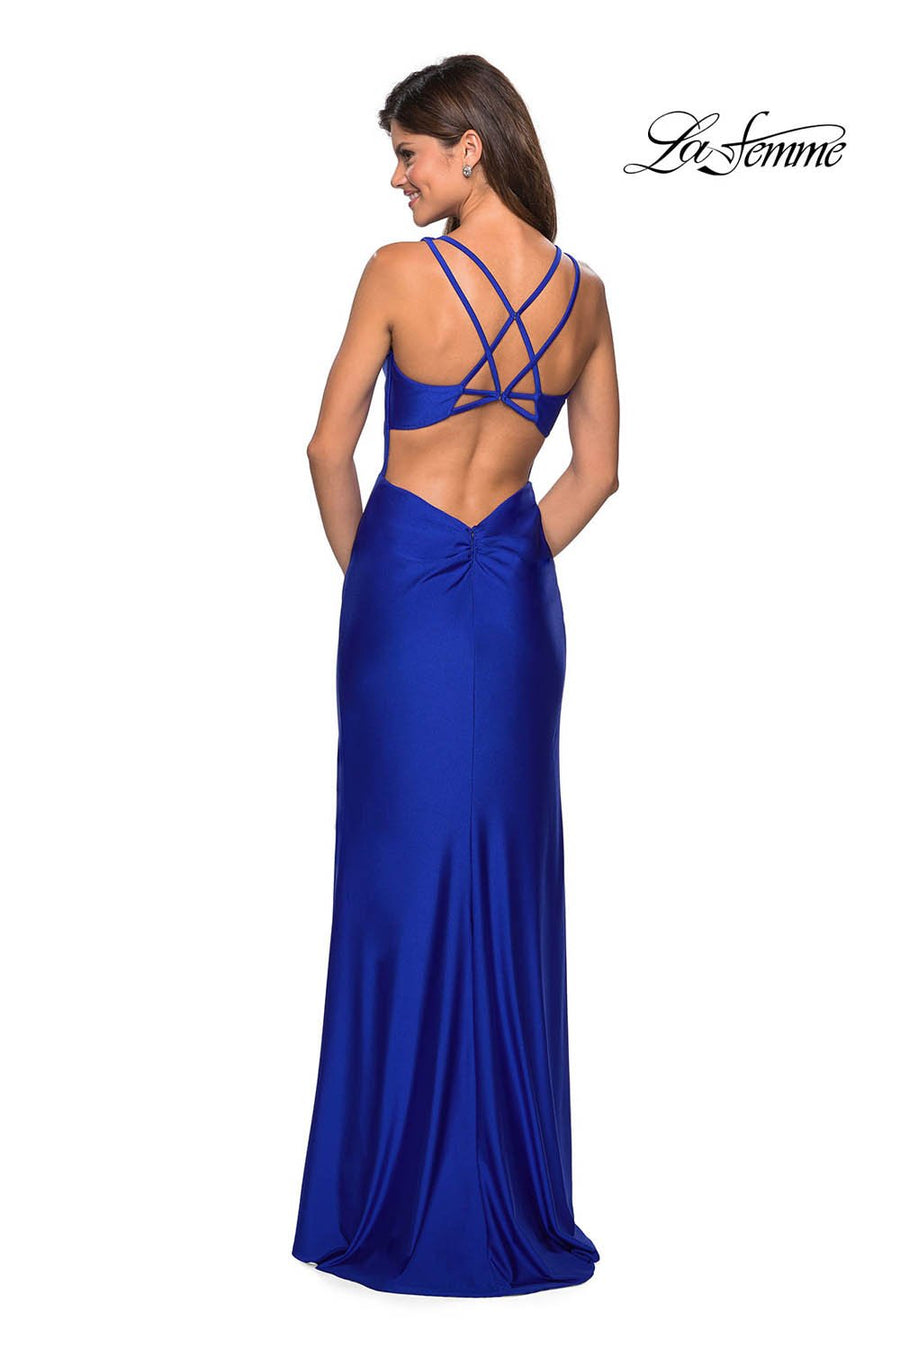 La Femme 27602 prom dress images.  La Femme 27602 is available in these colors: Black, Hot Fuchsia, Royal Blue, Yellow.